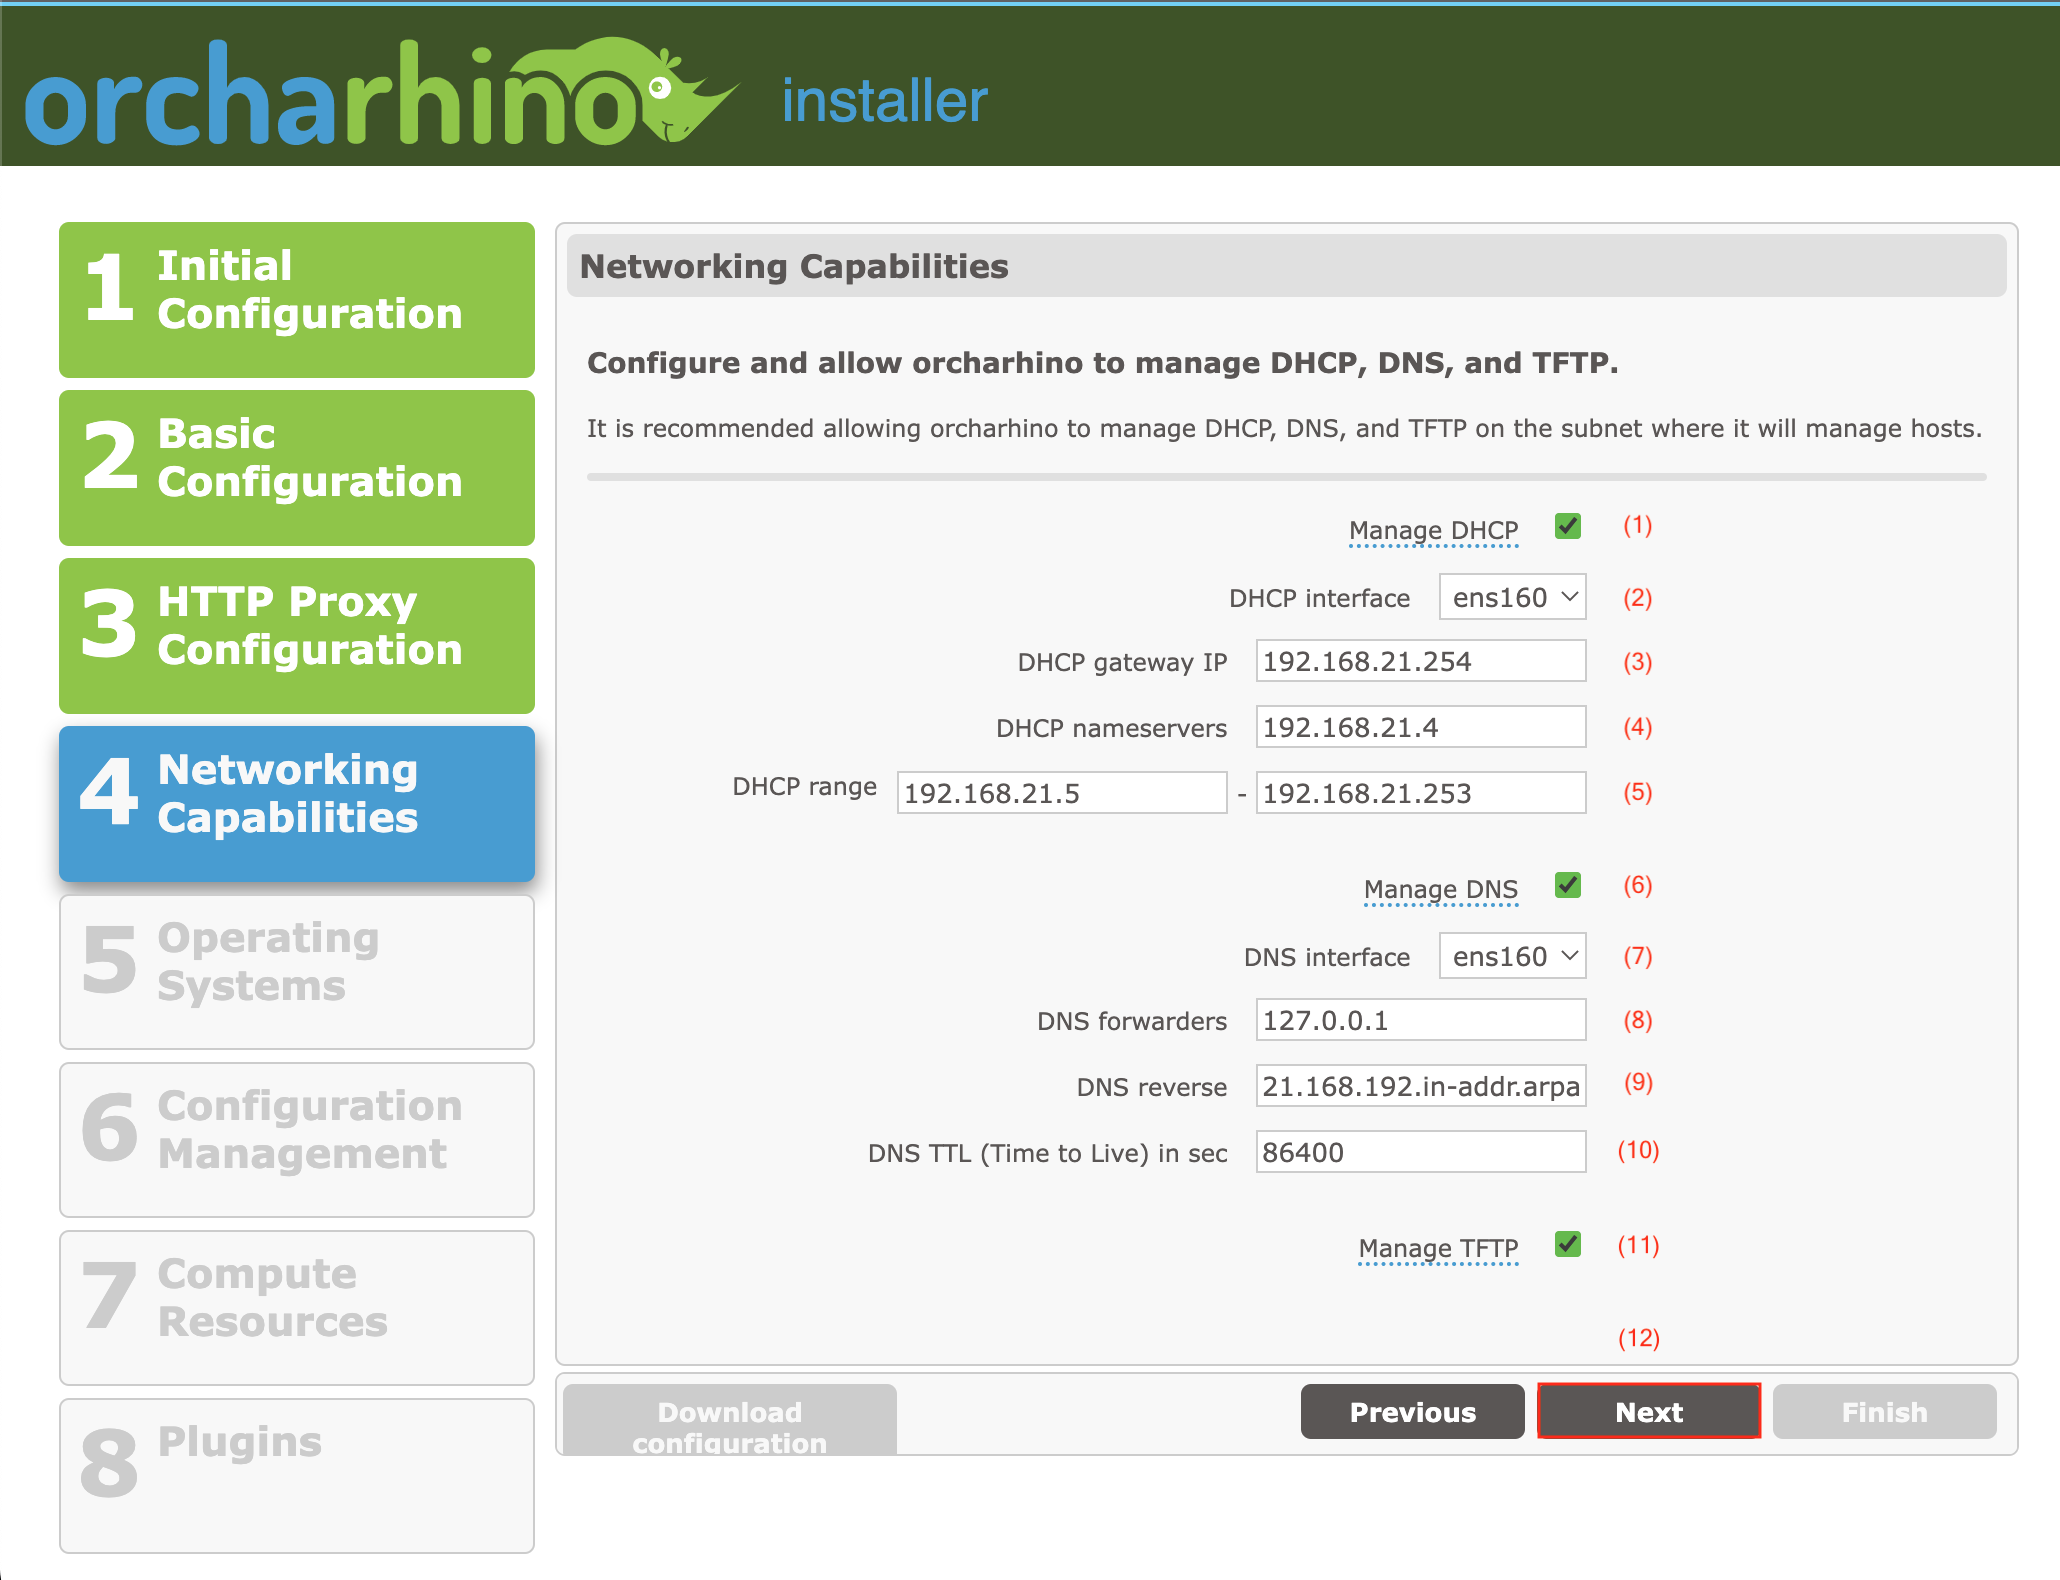 Selecting network capabilities in orcharhino Web Installer